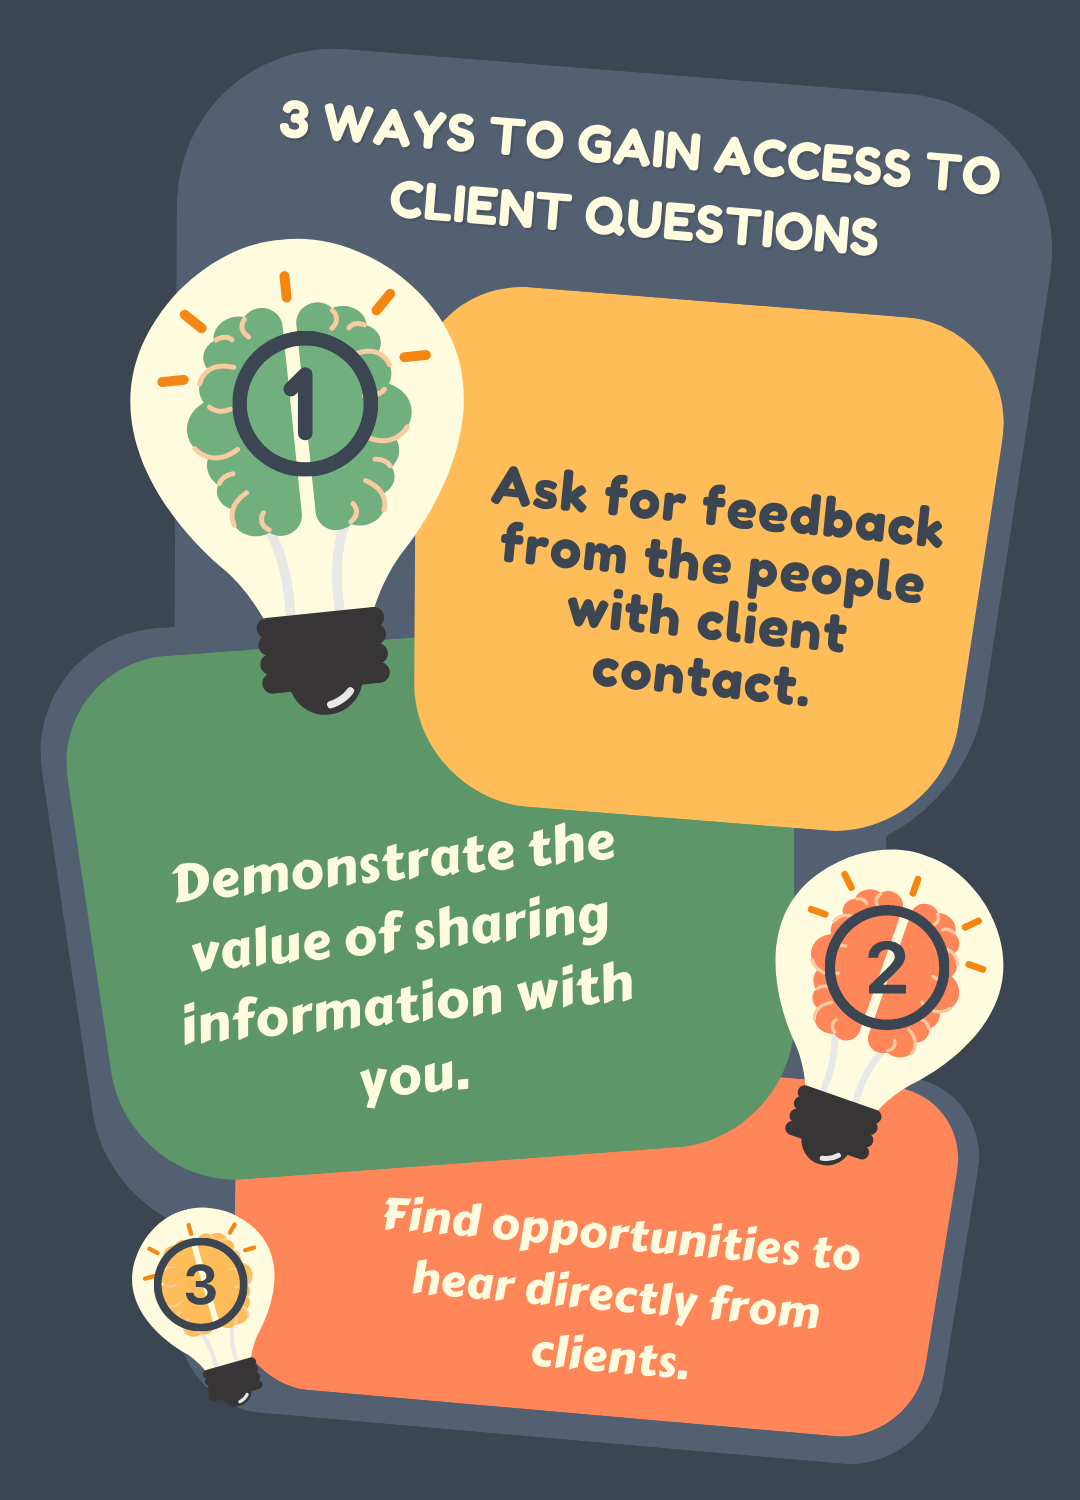 3 ways to gain access to client questions infographic